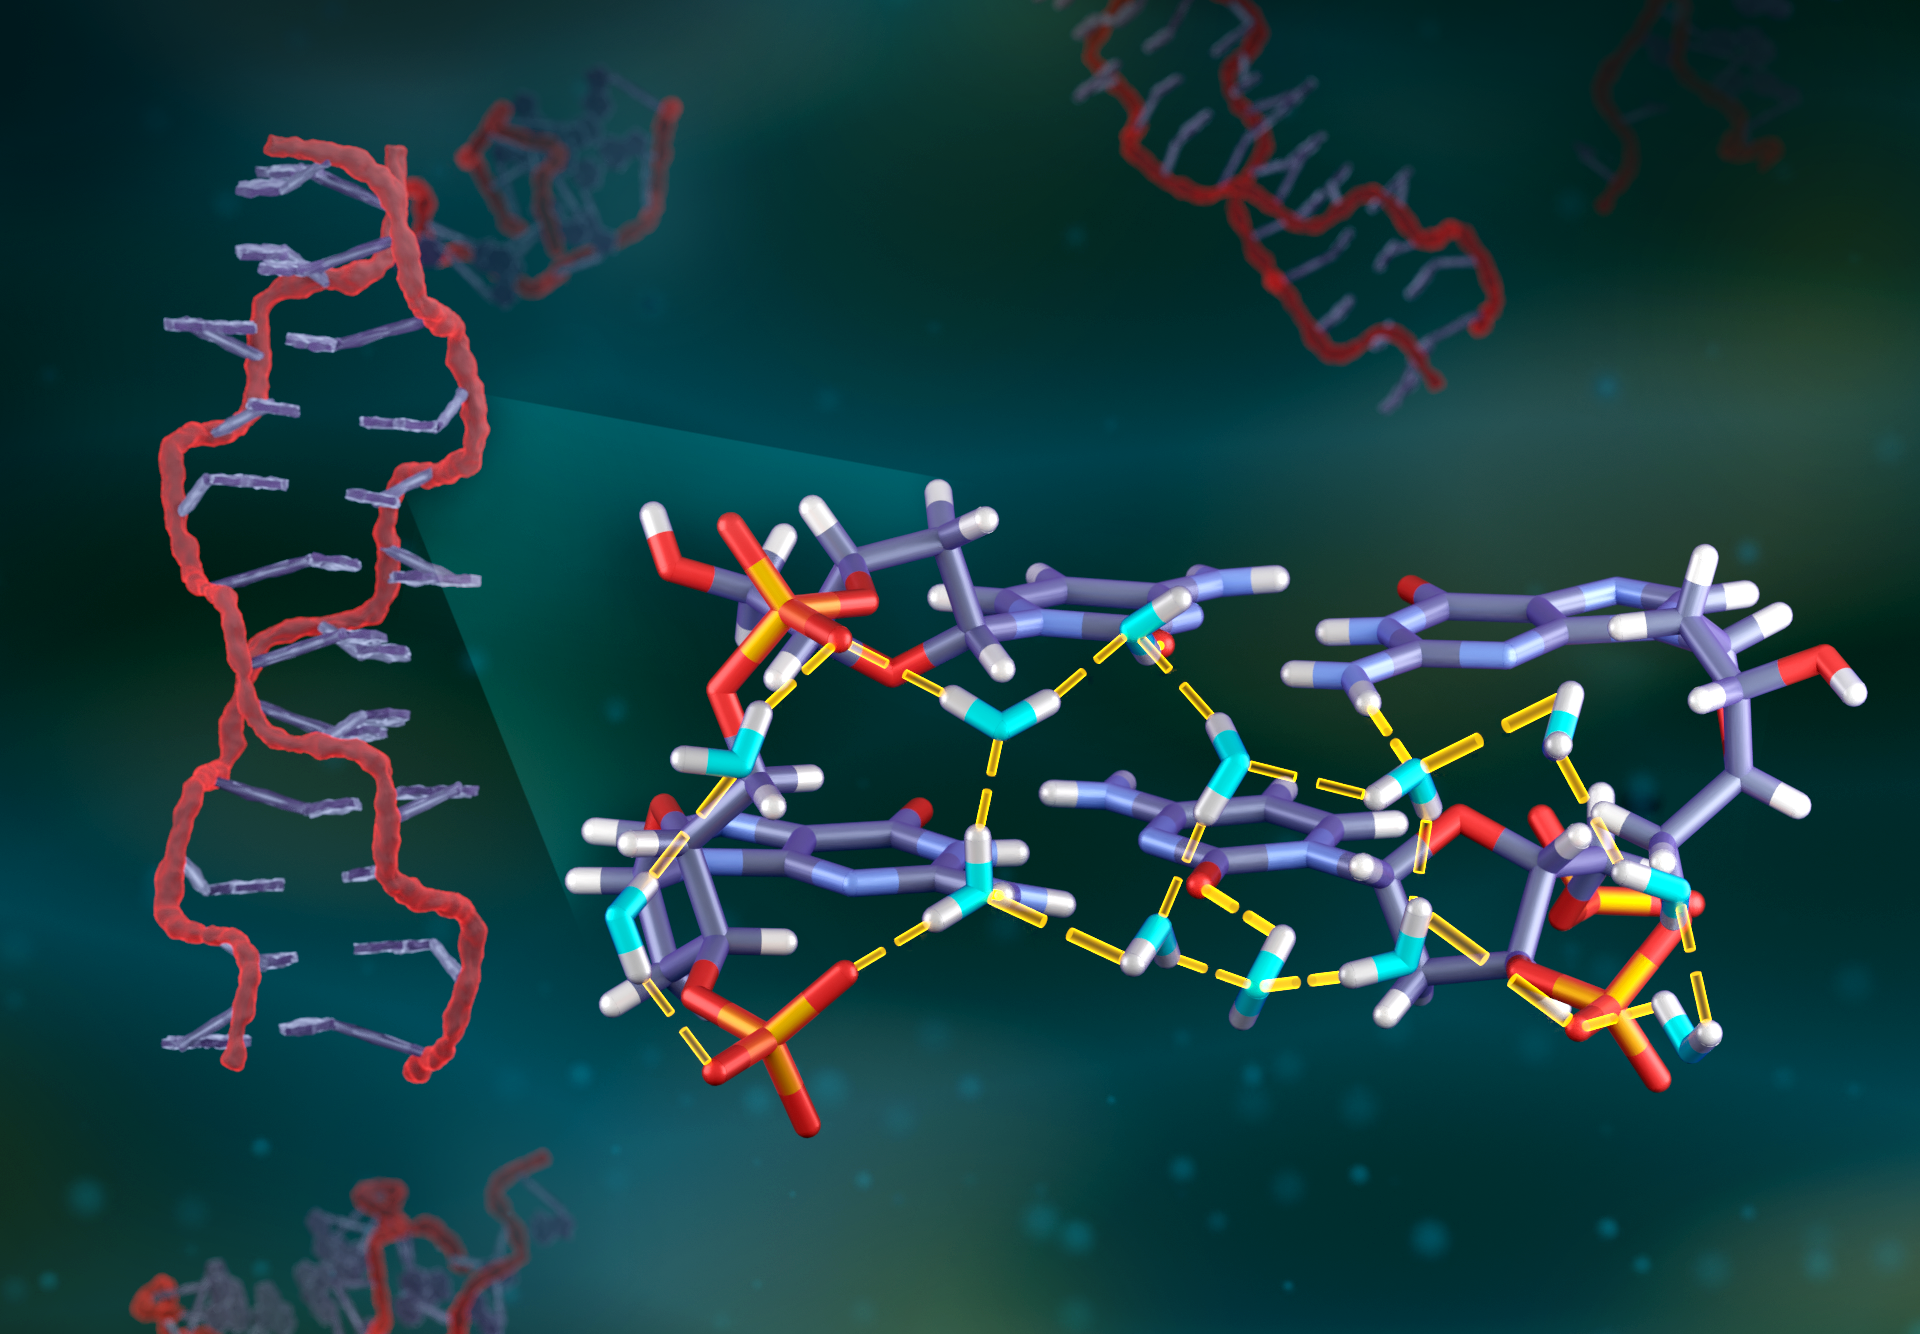 On a dark green background, several short pieces of DNA “float” around. One is vertical on the left side of the image, and a zoomed-in portion is seen horizonally on the right. The DNA on its side has more details (it’s a stick model) and shows water molecules (also stick models) surrounding the DNA. Hydrogen bonds between the water and the DNA are visualized as yellow dashes.